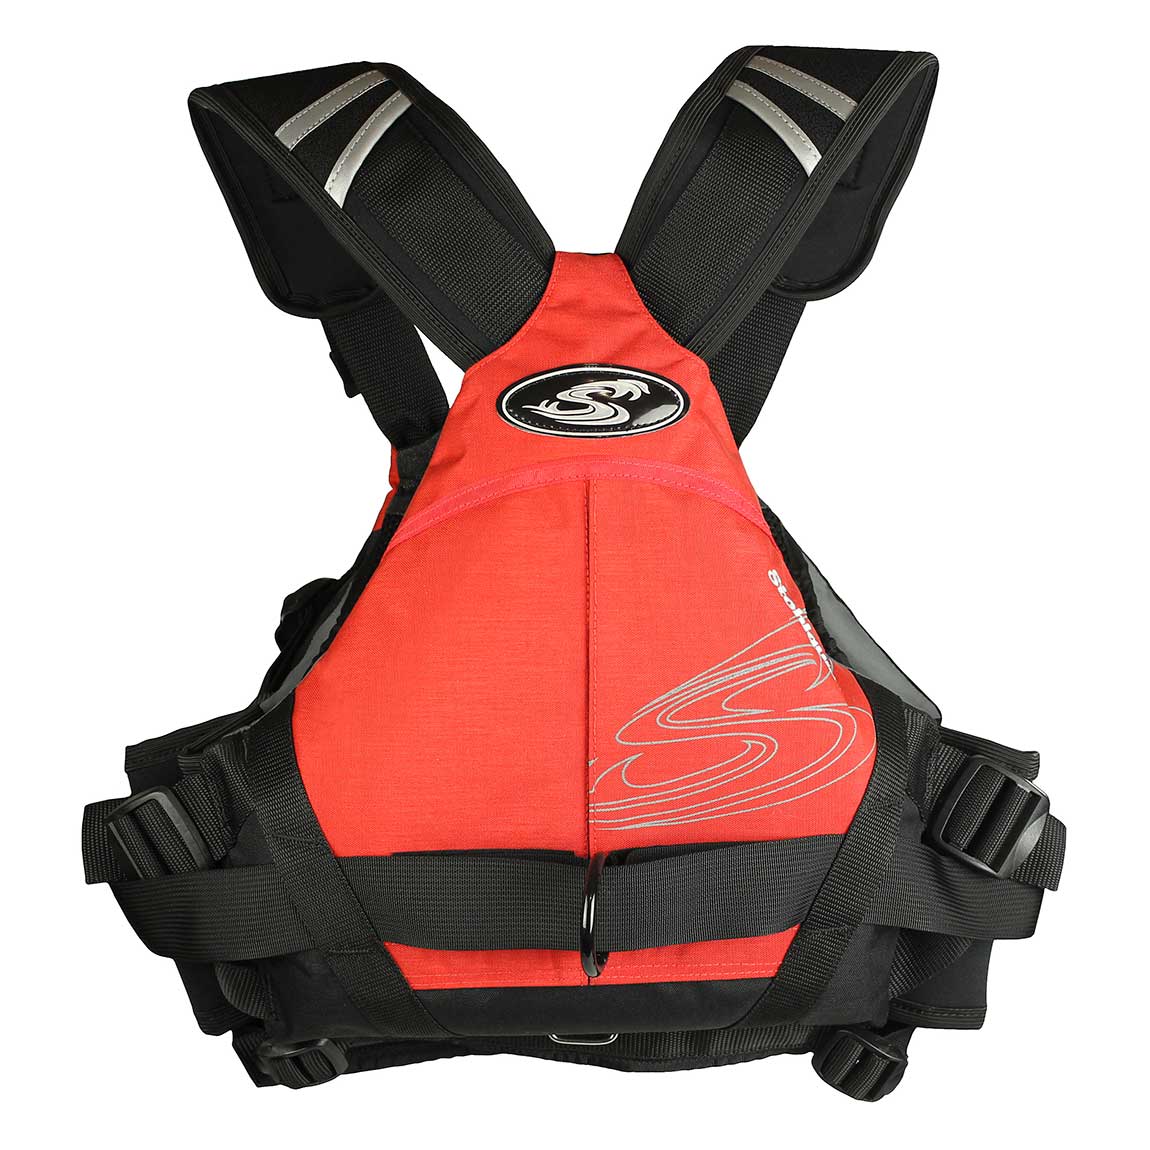 Featuring the Descent Rescue PFD gift for kayaker, gift for rafter, rescue pfd manufactured by Stohlquist shown here from a sixth angle.